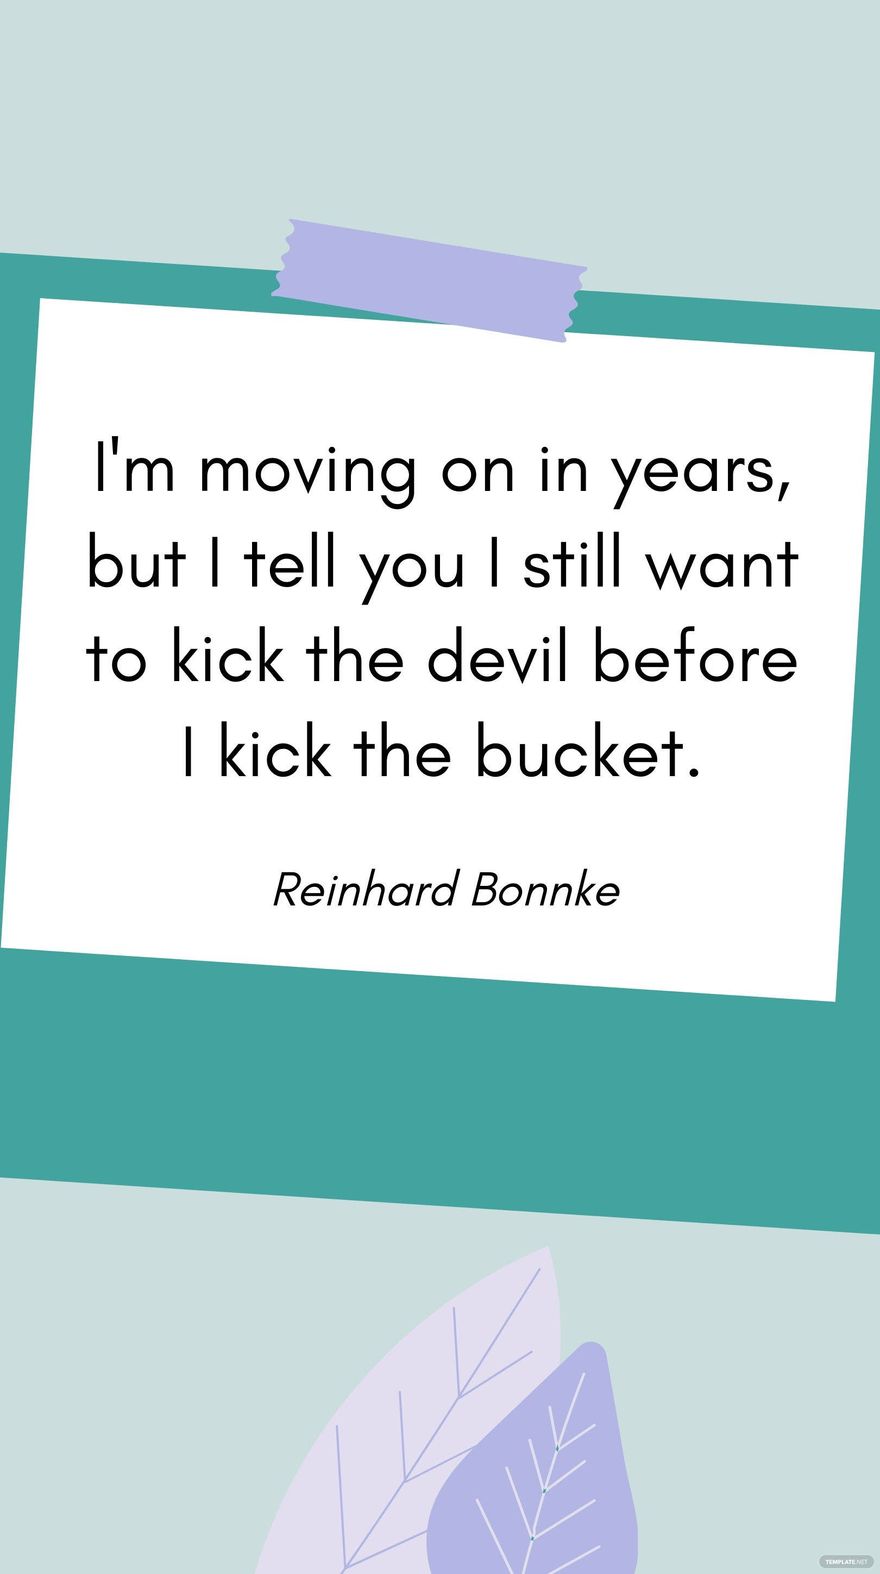 How Soon Before You Kick The Bucket? What Are You Doing About It